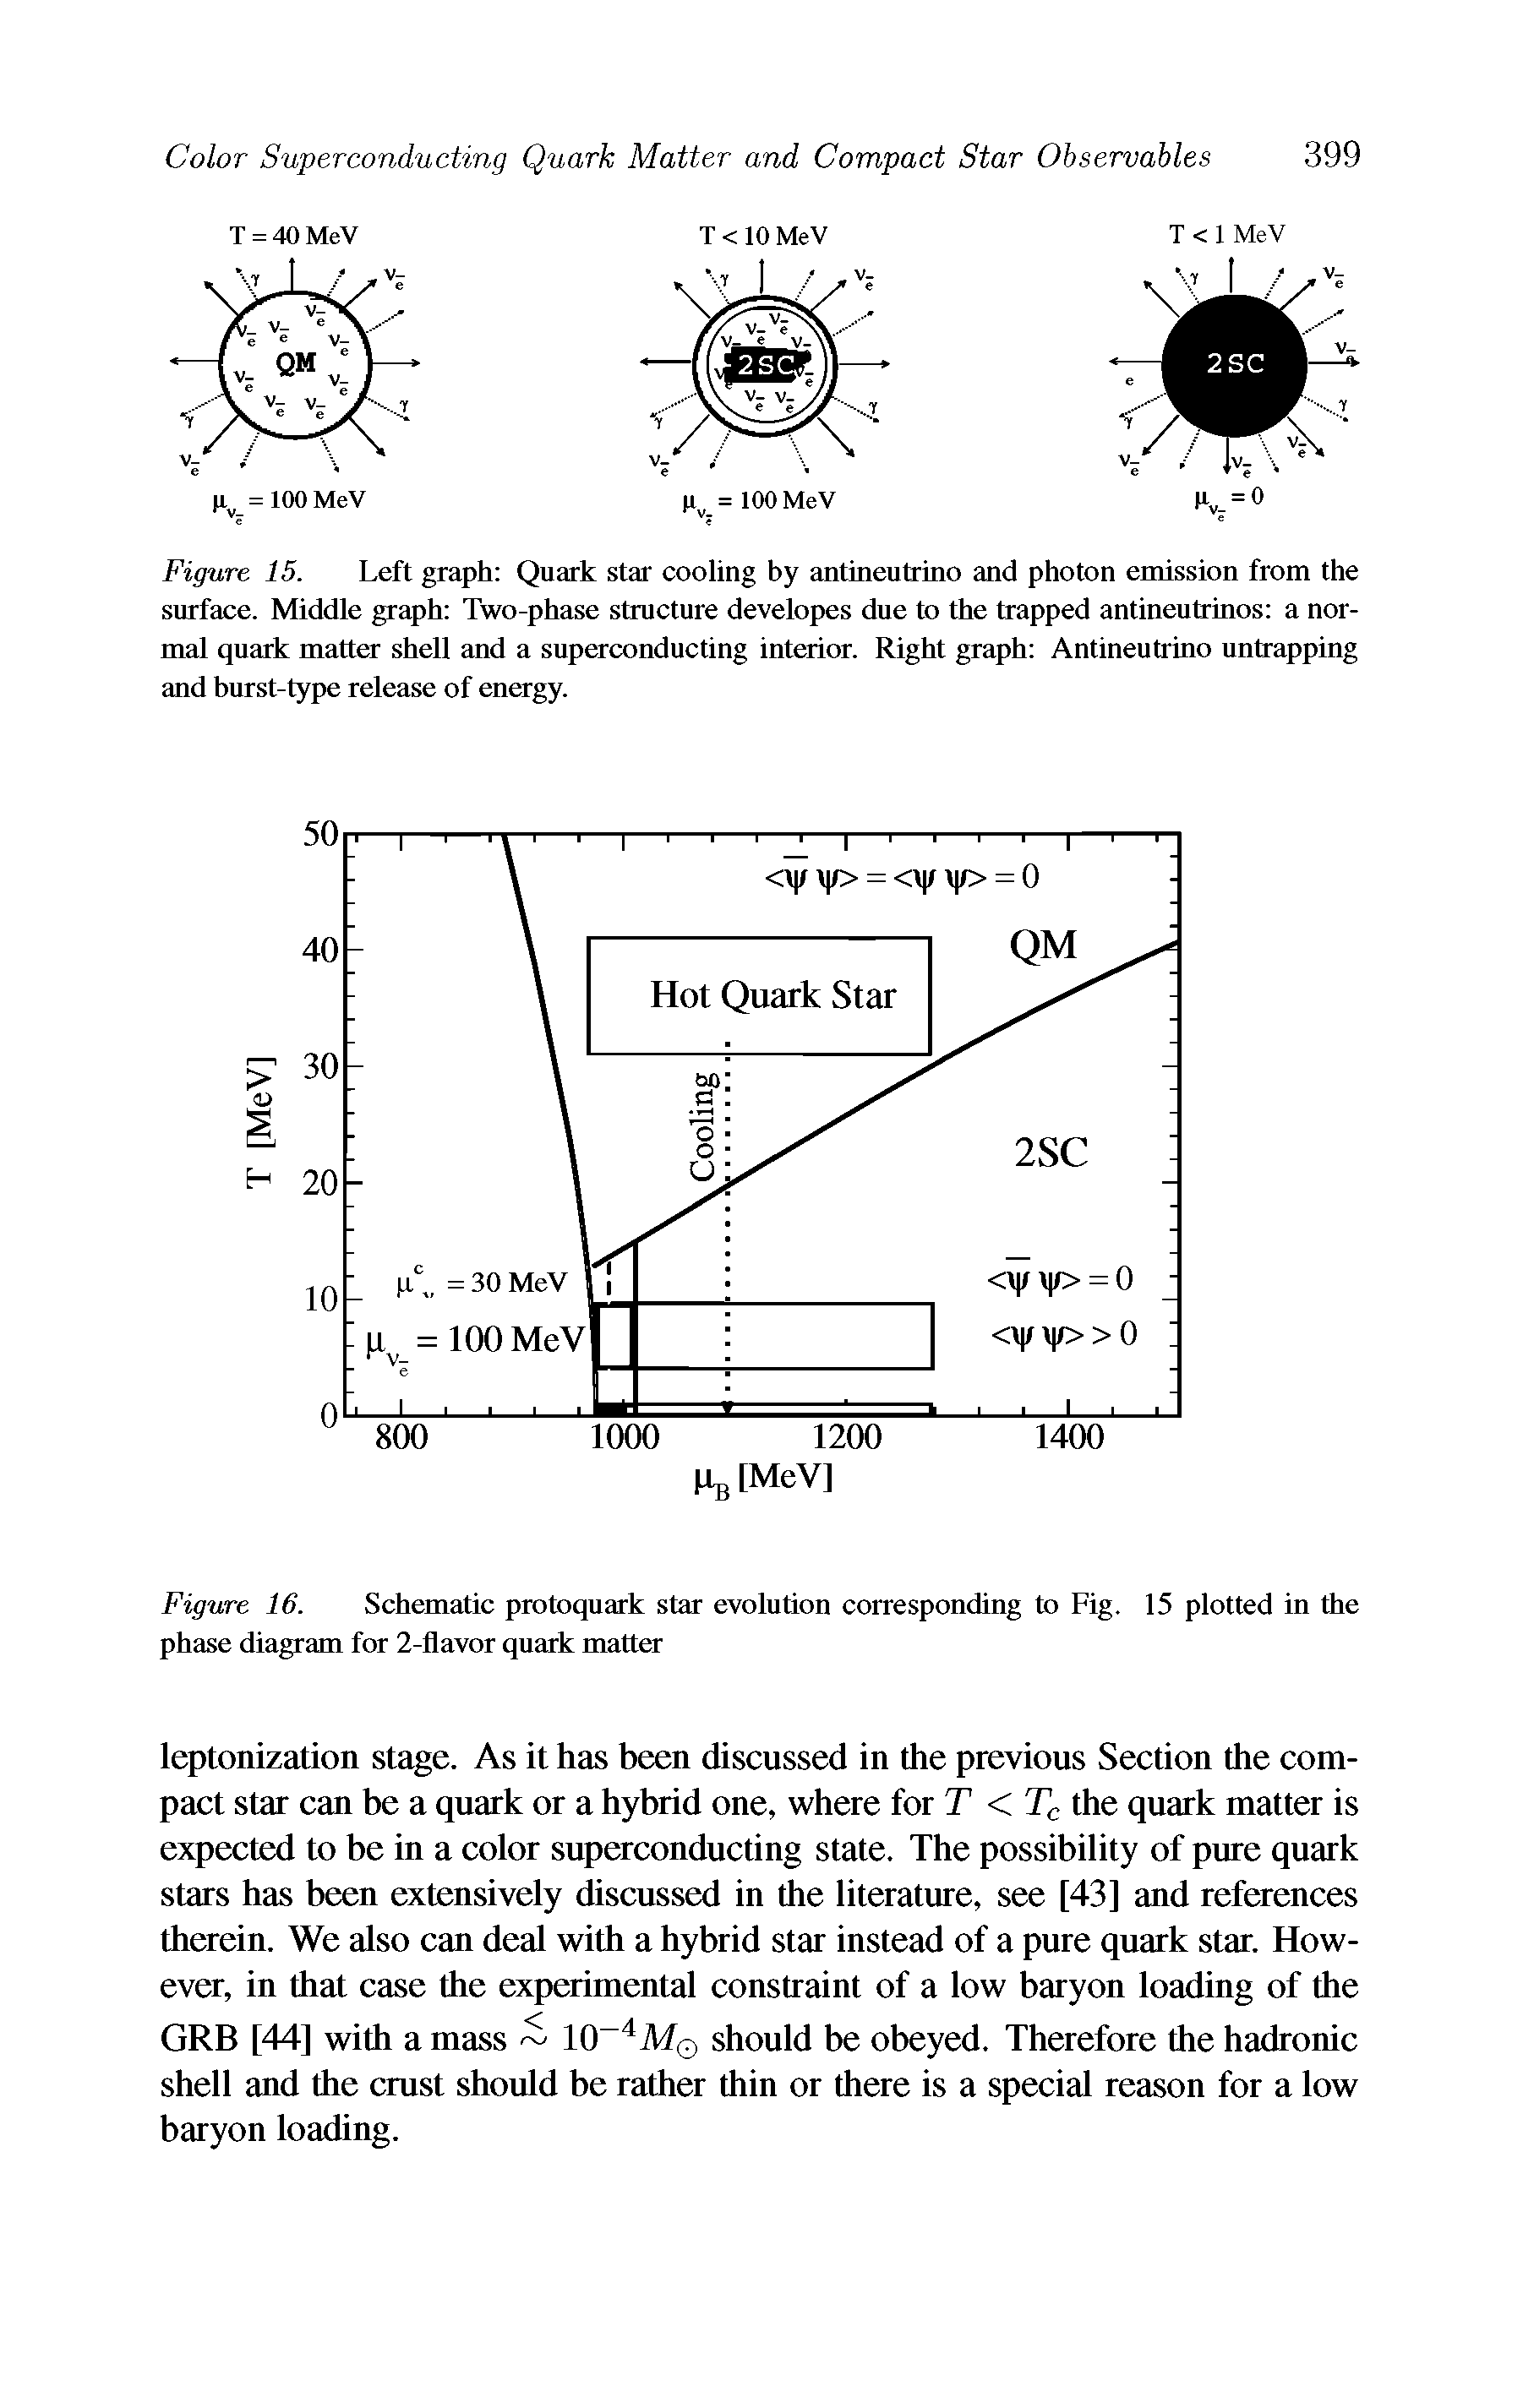 Figure 15. Left graph Quark star cooling by antineutrino and photon emission from the surface. Middle graph Two-phase structure developes due to the trapped antineutrinos a normal quark matter shell and a superconducting interior. Right graph Antineutrino untrapping and burst-type release of energy.